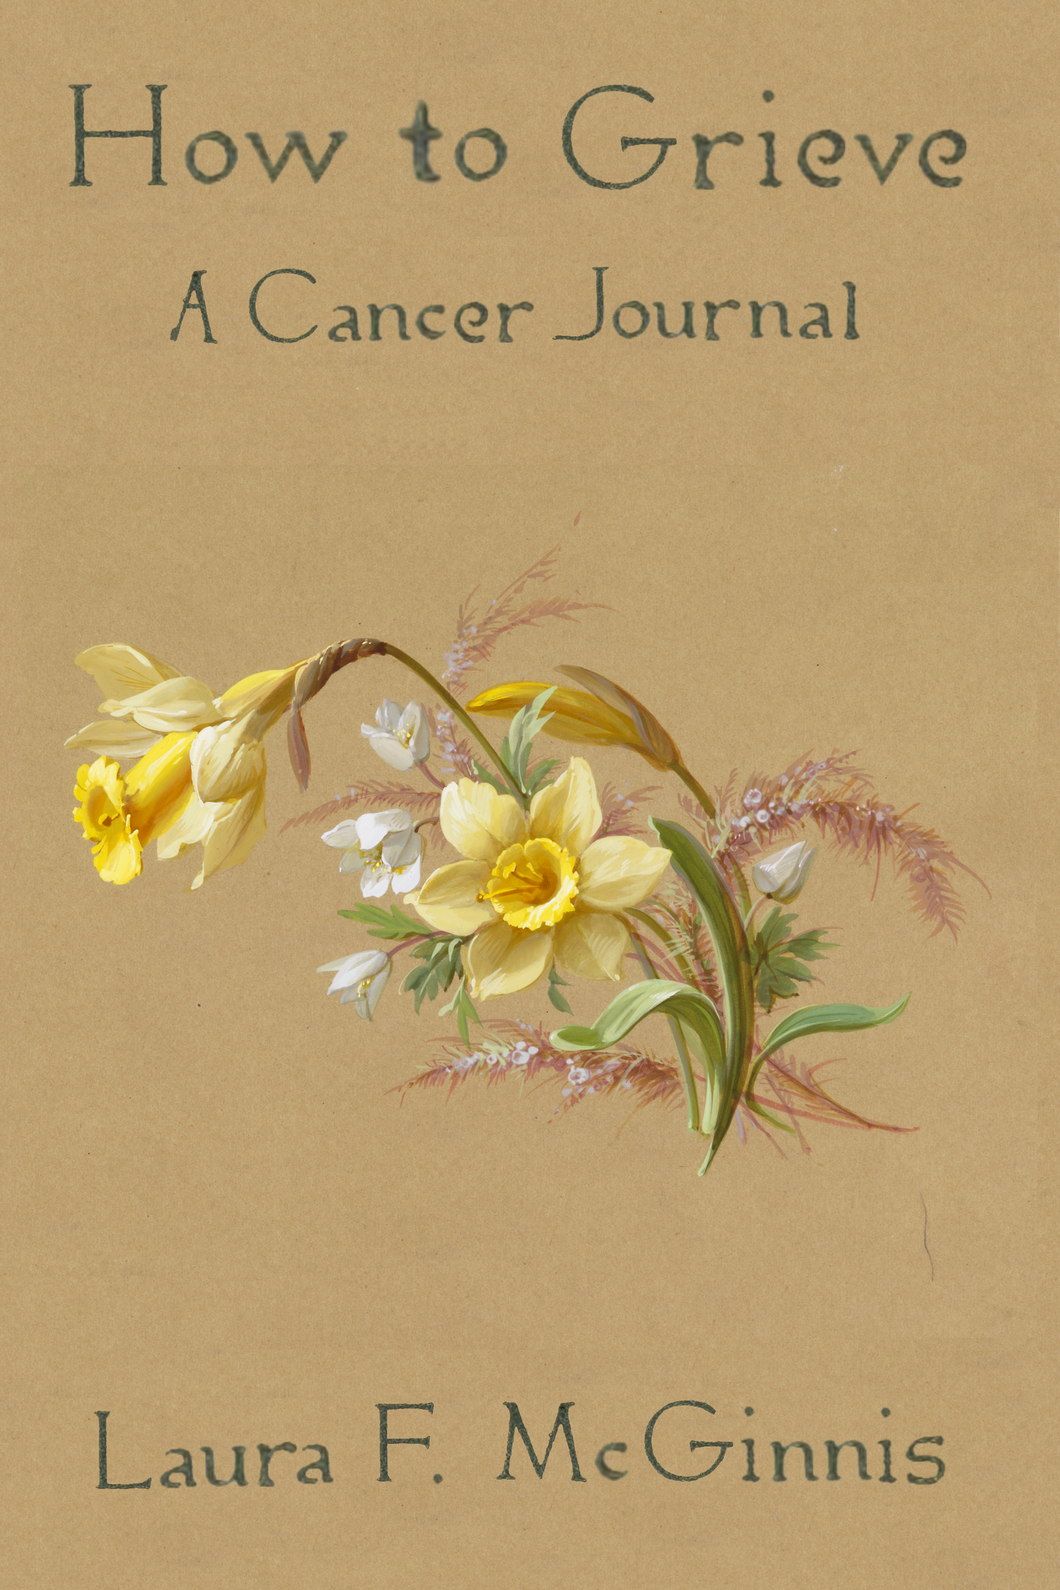 How to Grieve: a cancer journal, by Laura F. McGinnis-Print Books-Bottlecap Press